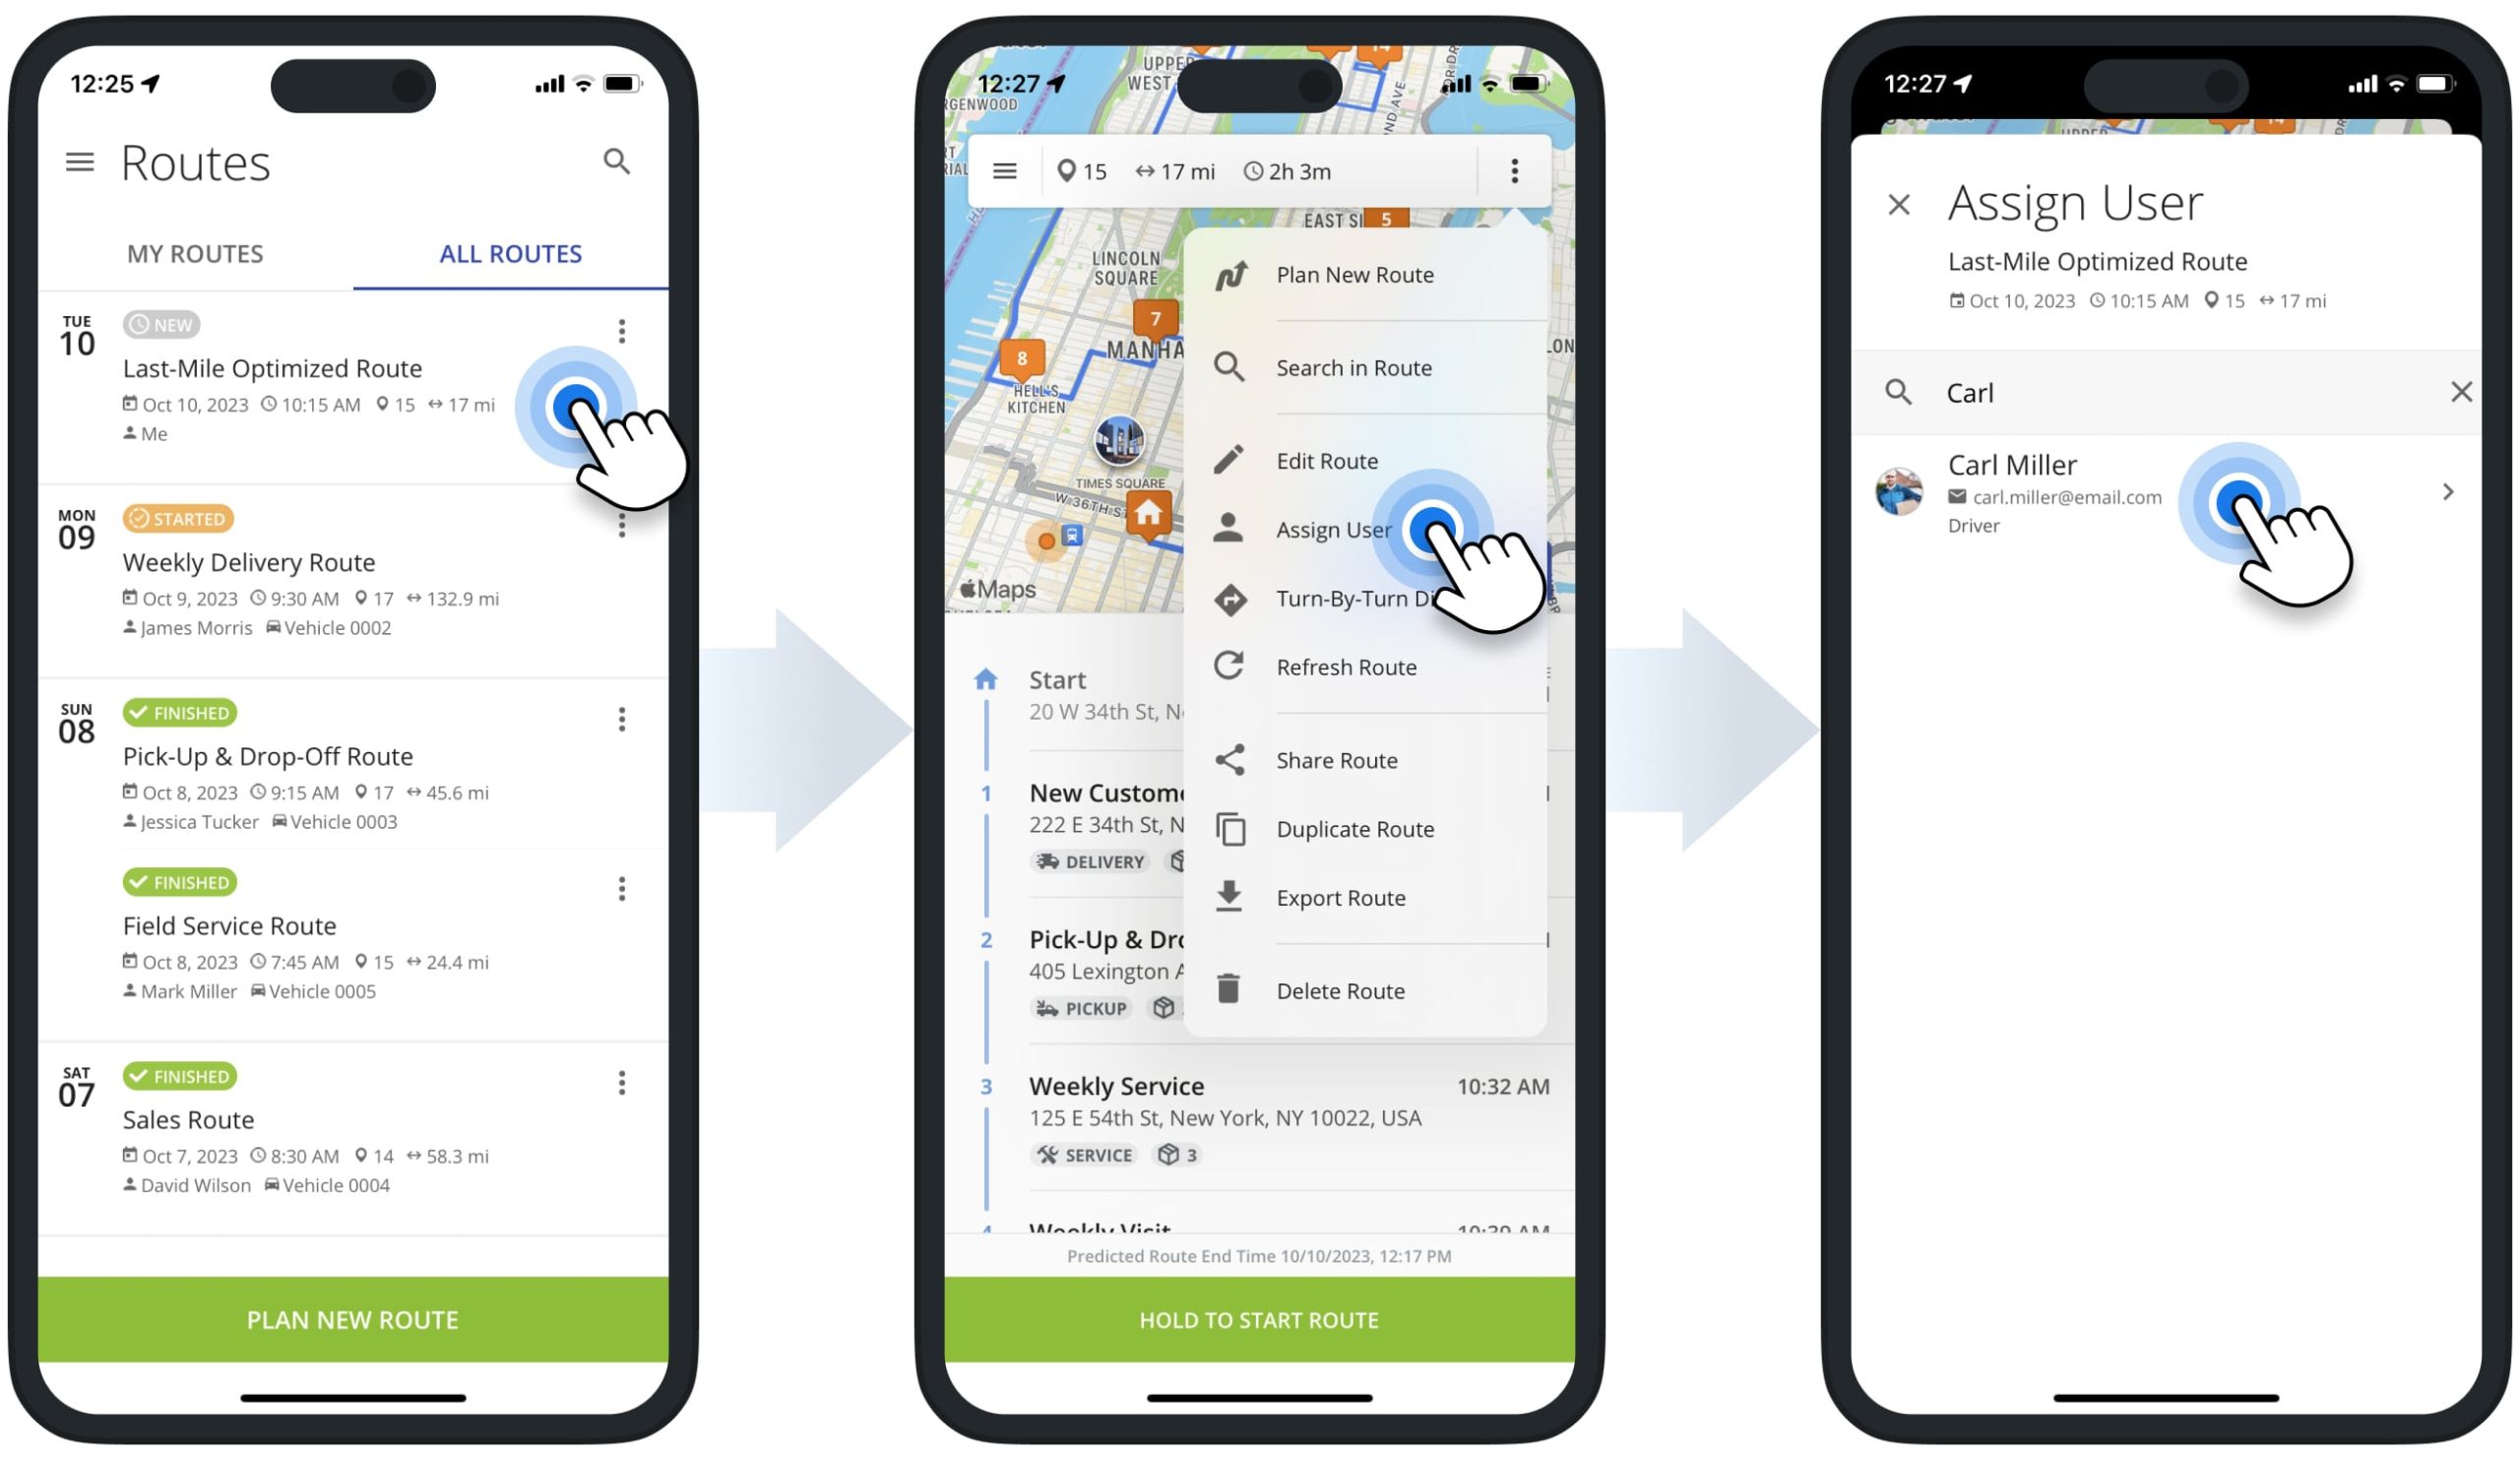 Dispatching routes to drivers, managers, route planners, and other team members using Route4Me's iPhone Route Optimization app.